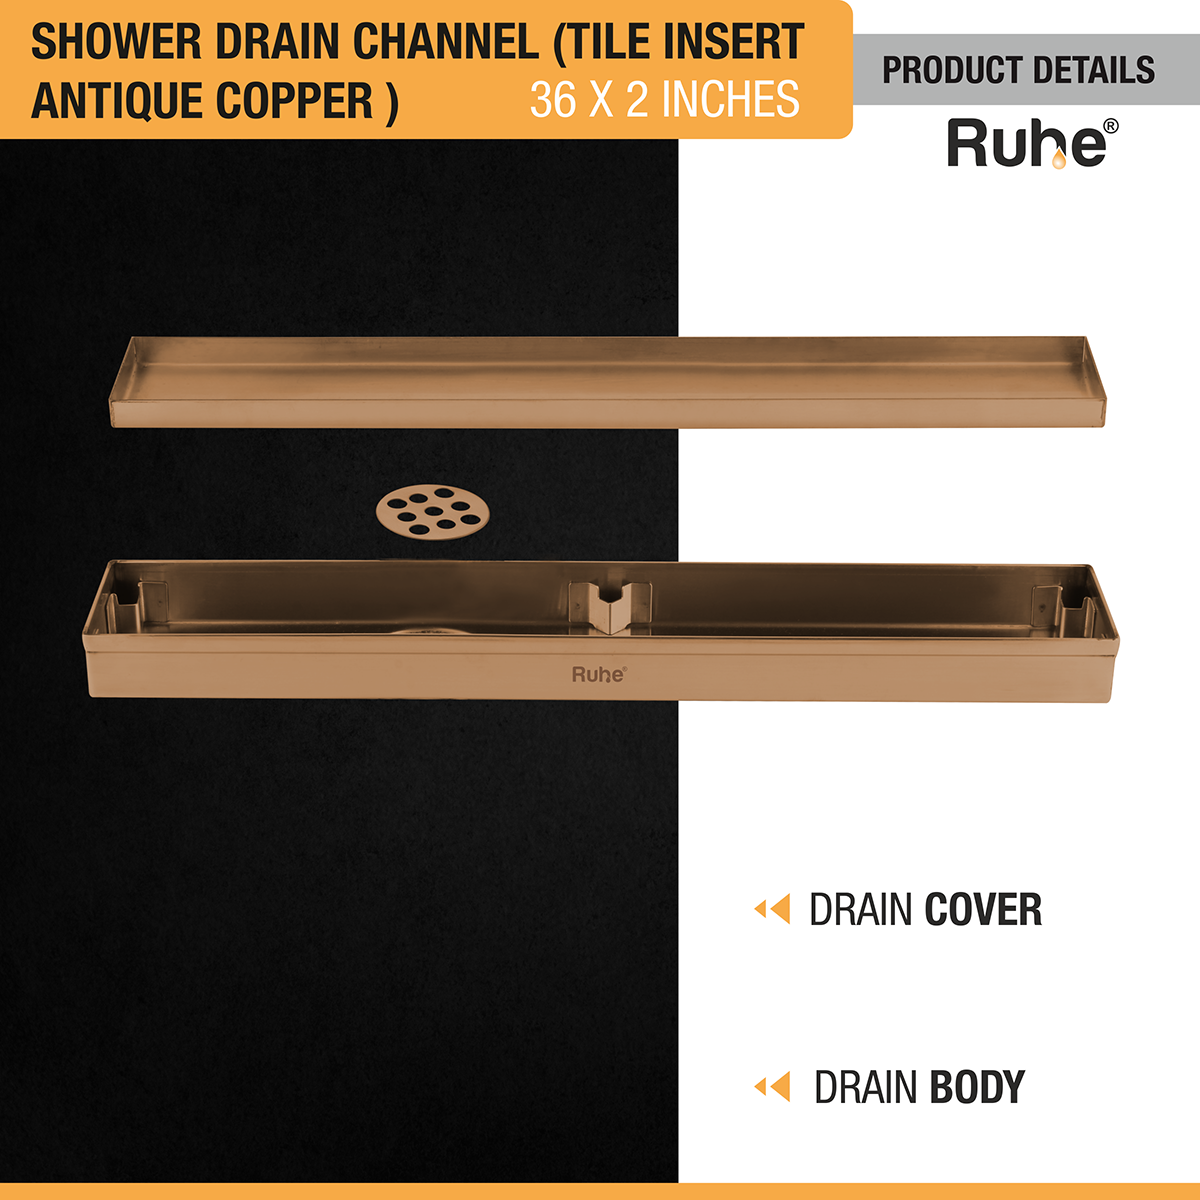 Marble Insert Shower Drain Channel (36 x 2 Inches) ROSE GOLD PVD Coated with drain cover and drain body